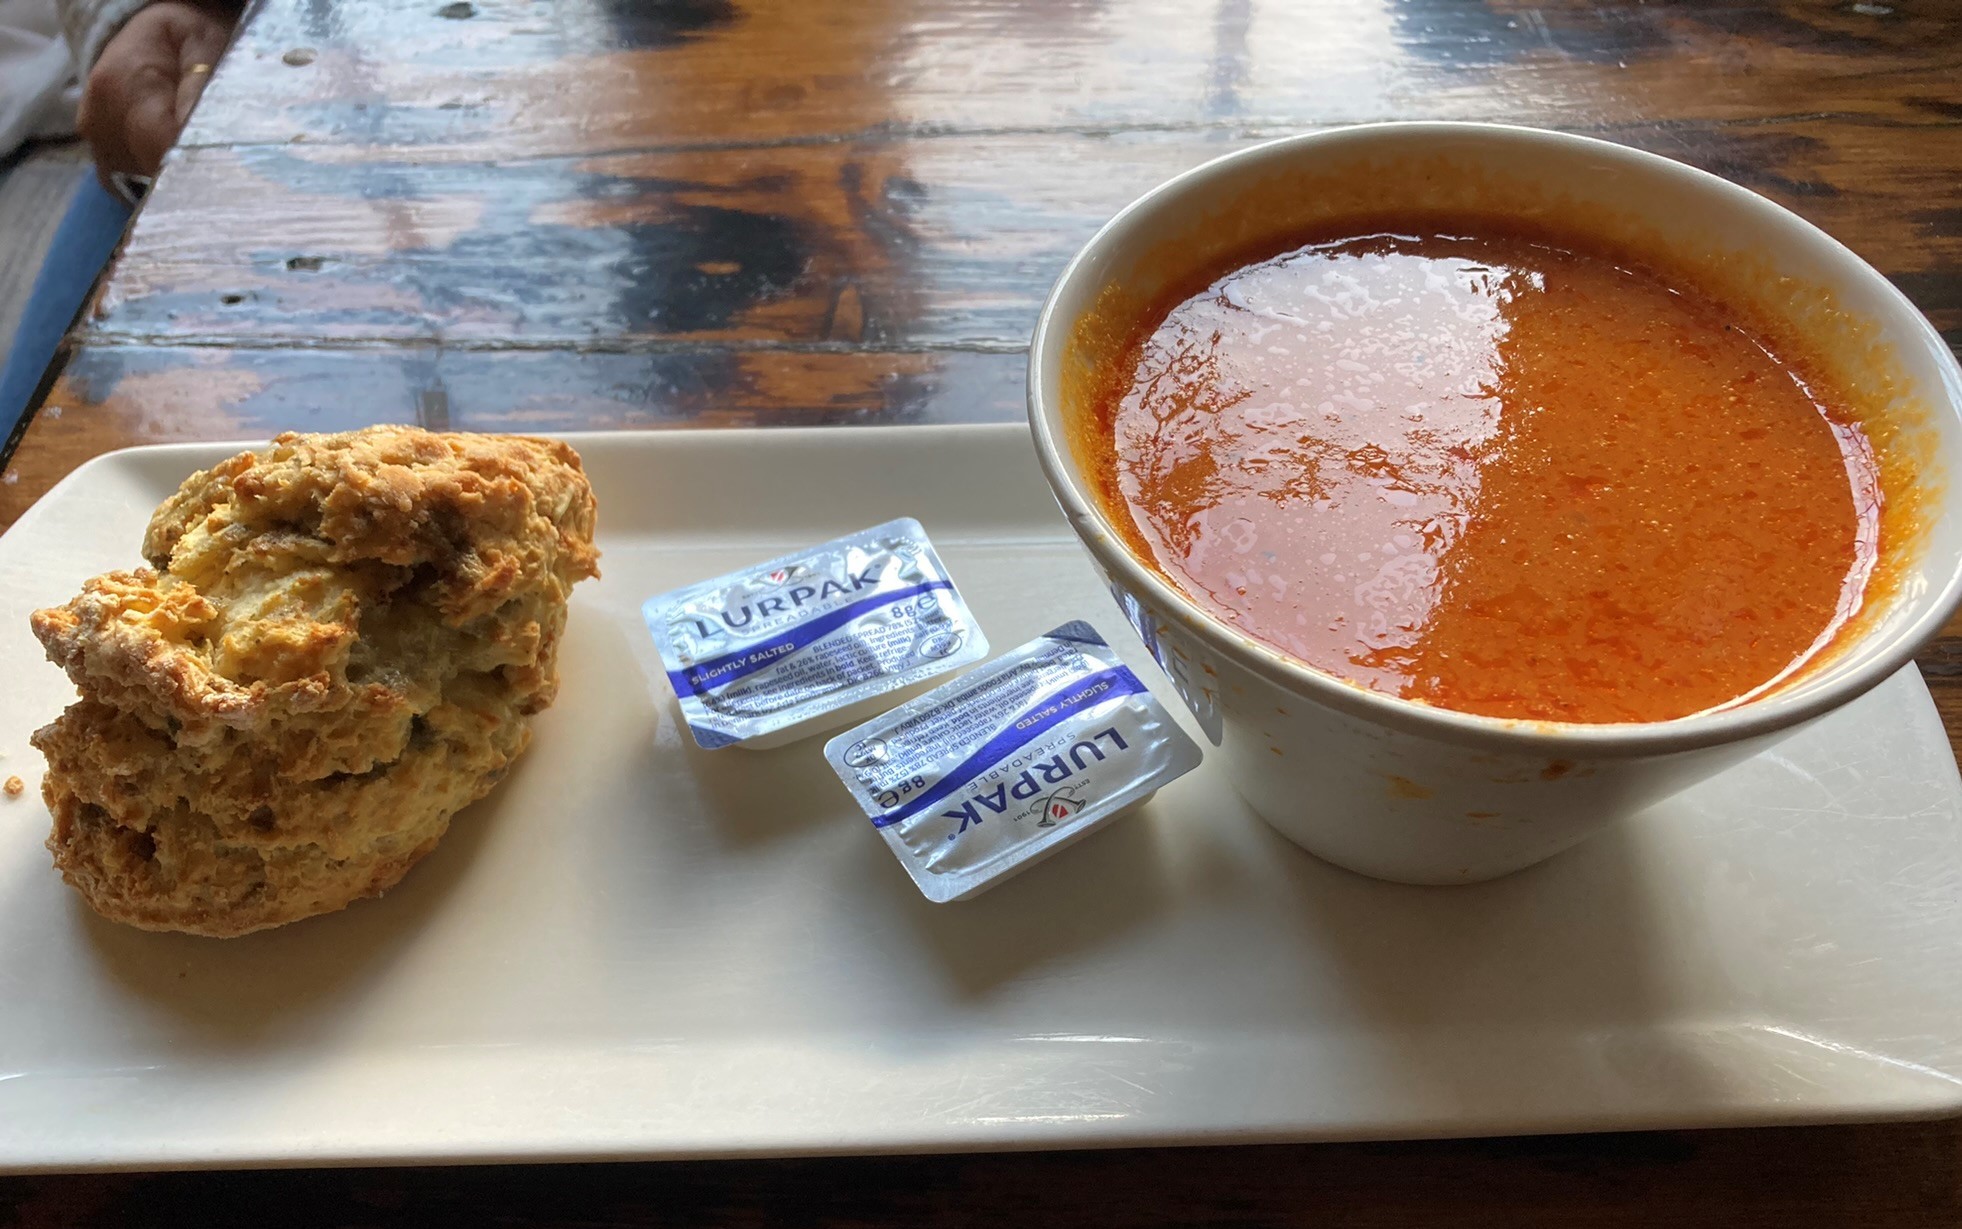 Petras spicy sweet potato and red pepper soup with a stinky stillton scone